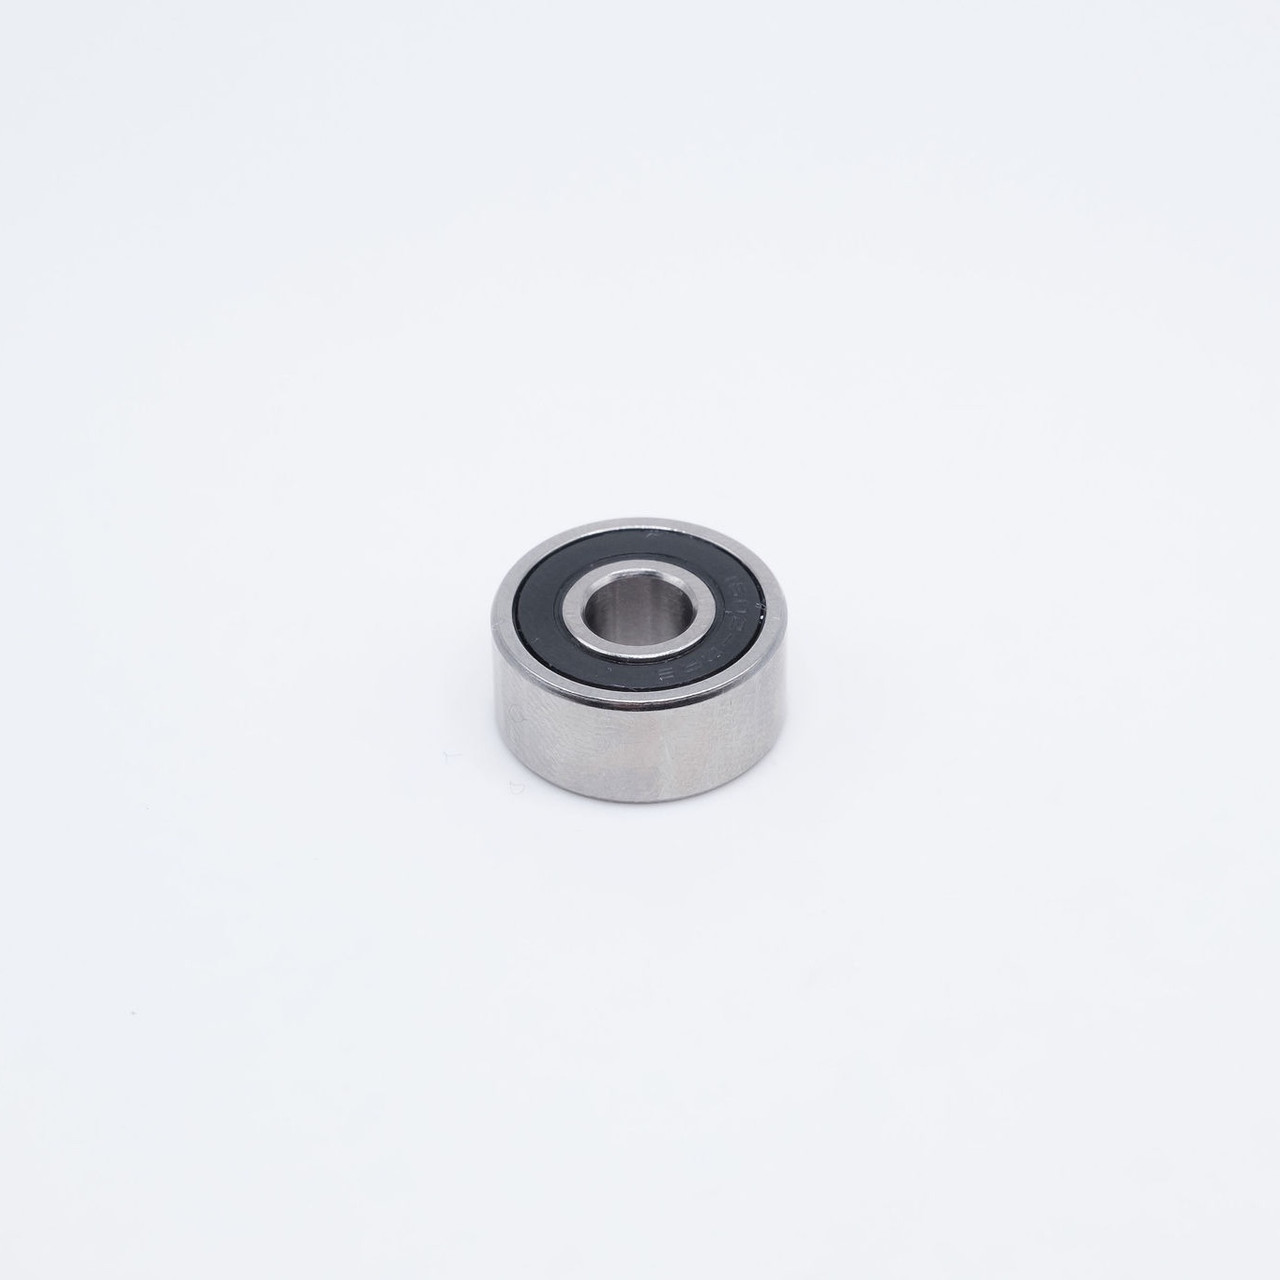 S1641-2RS Stainless Steel Ball Bearing 1x2x9/16 Flat View